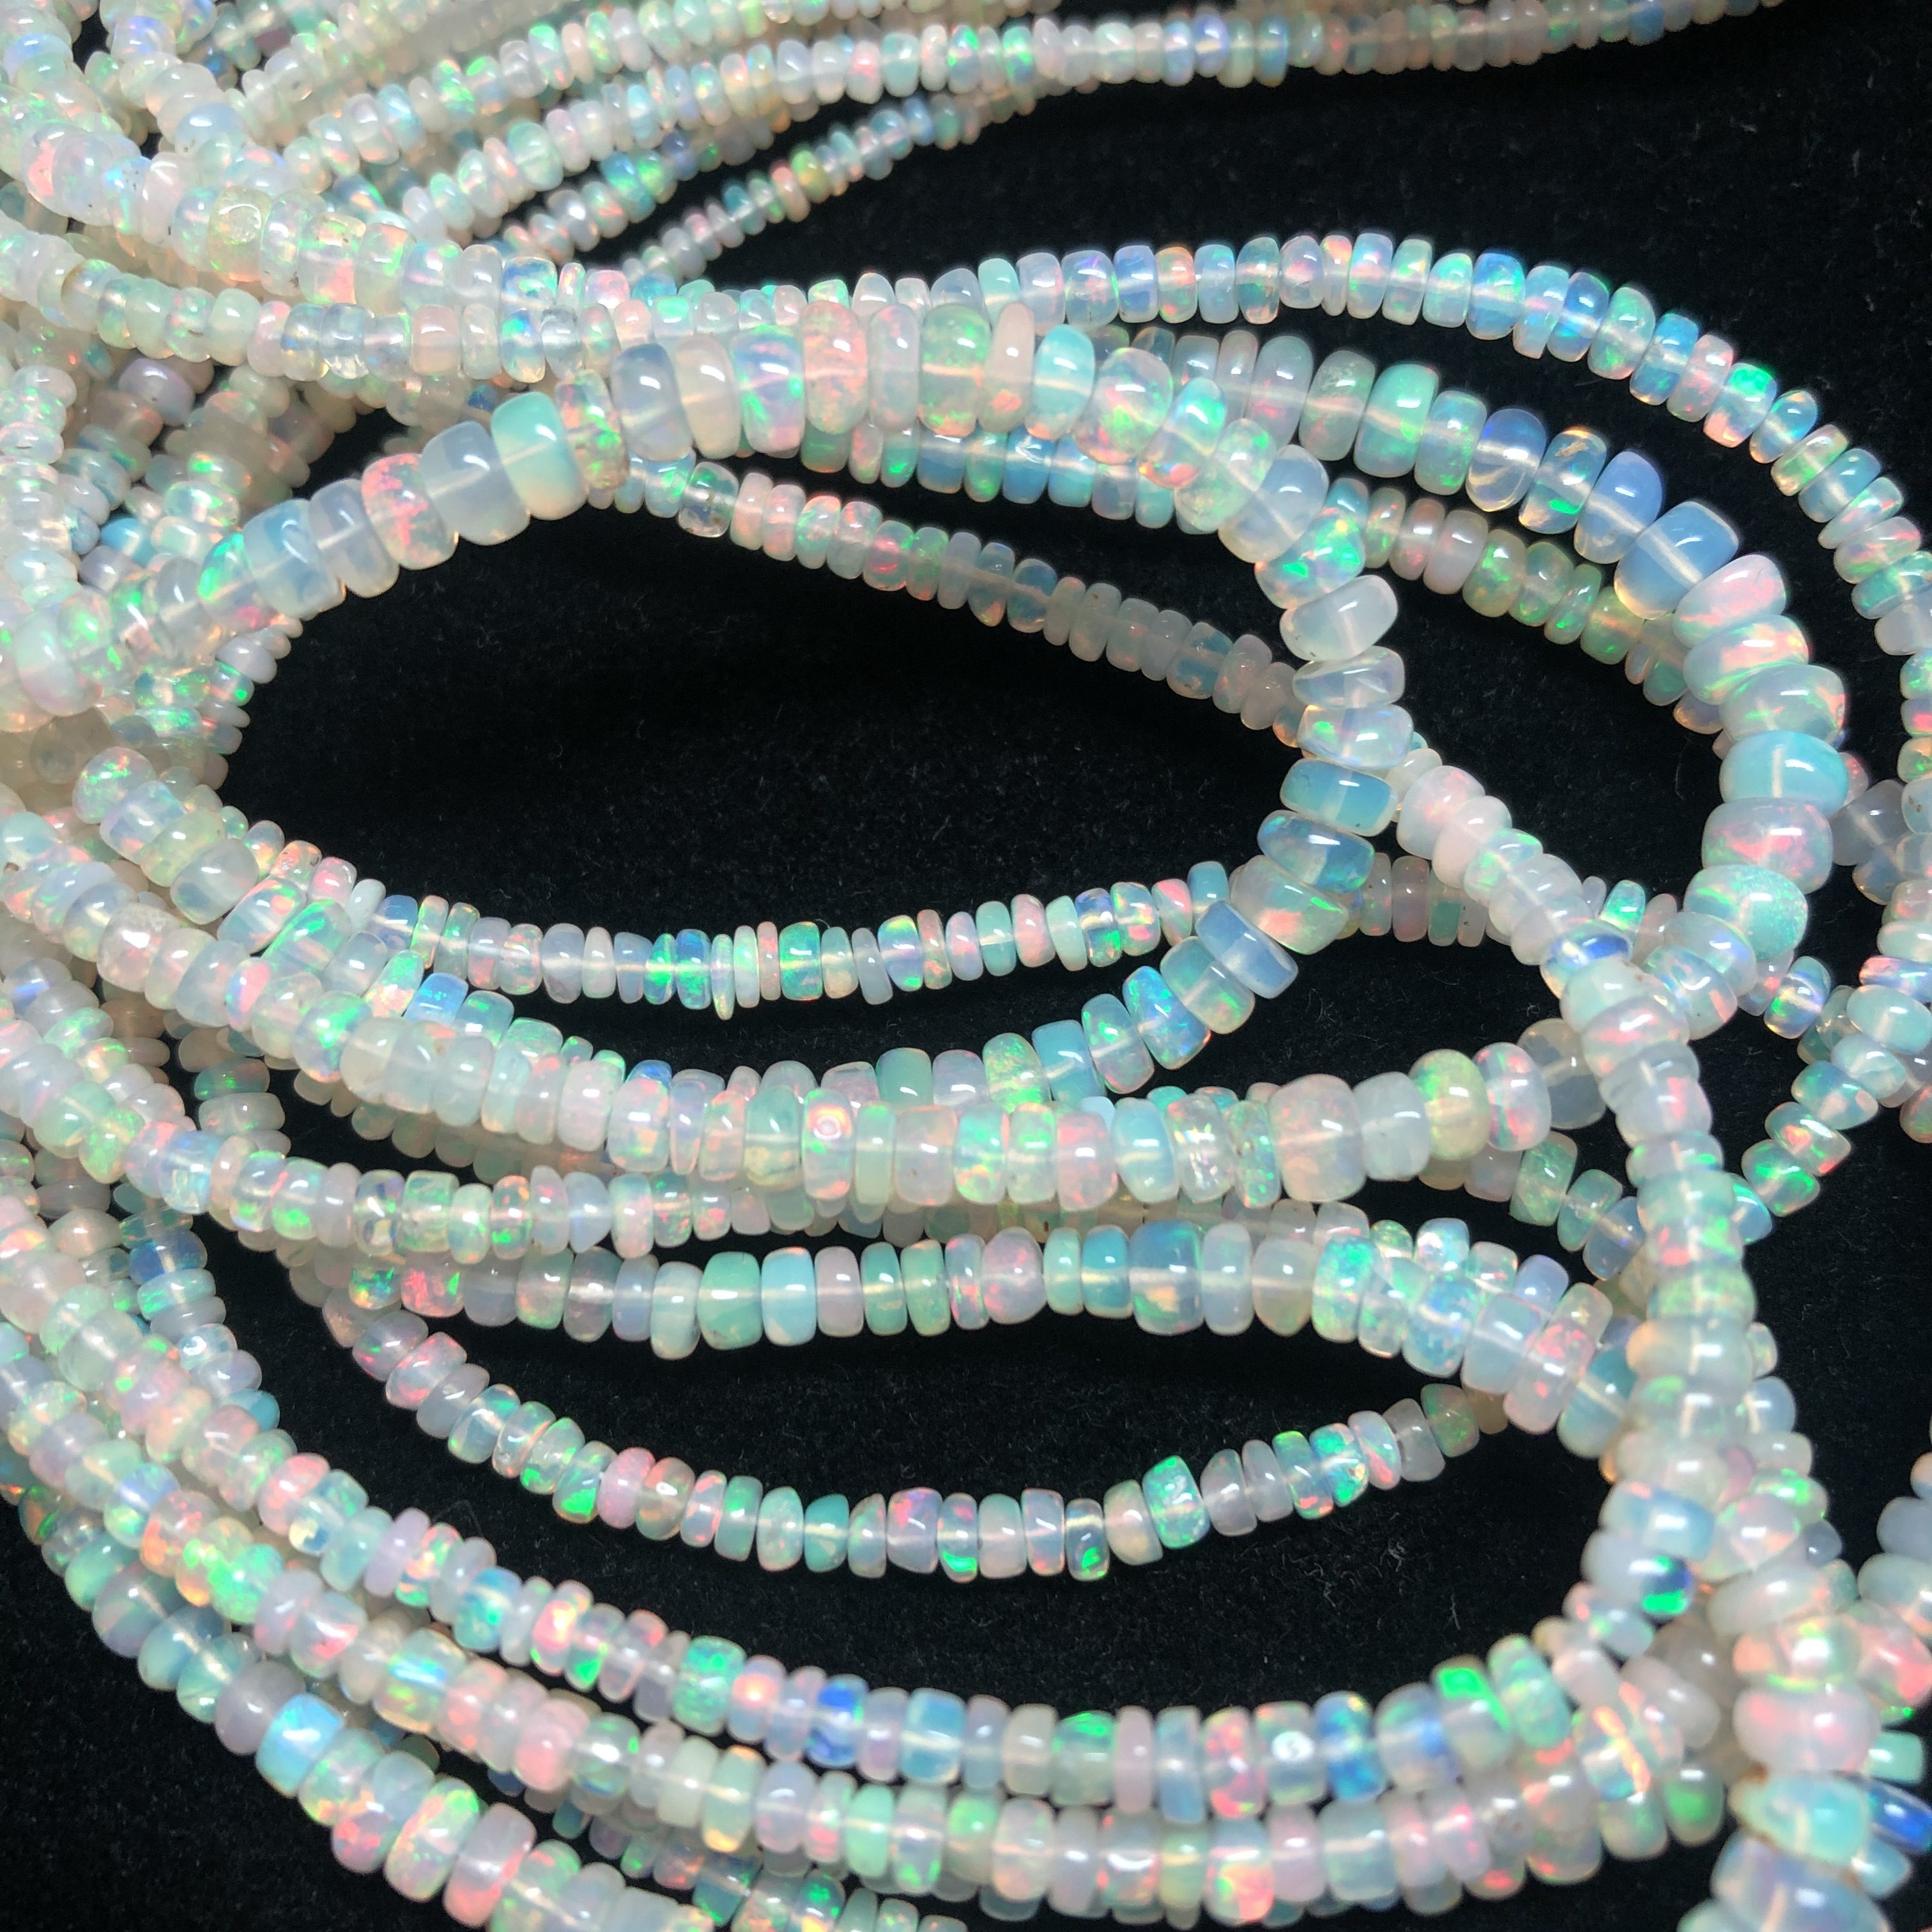 6X3 to 5X3 MM Aqua Peruvian Opal Rondelle Shaped Smooth Beads Opal Strand Beads Necklace Opal Bead 7 Inchess